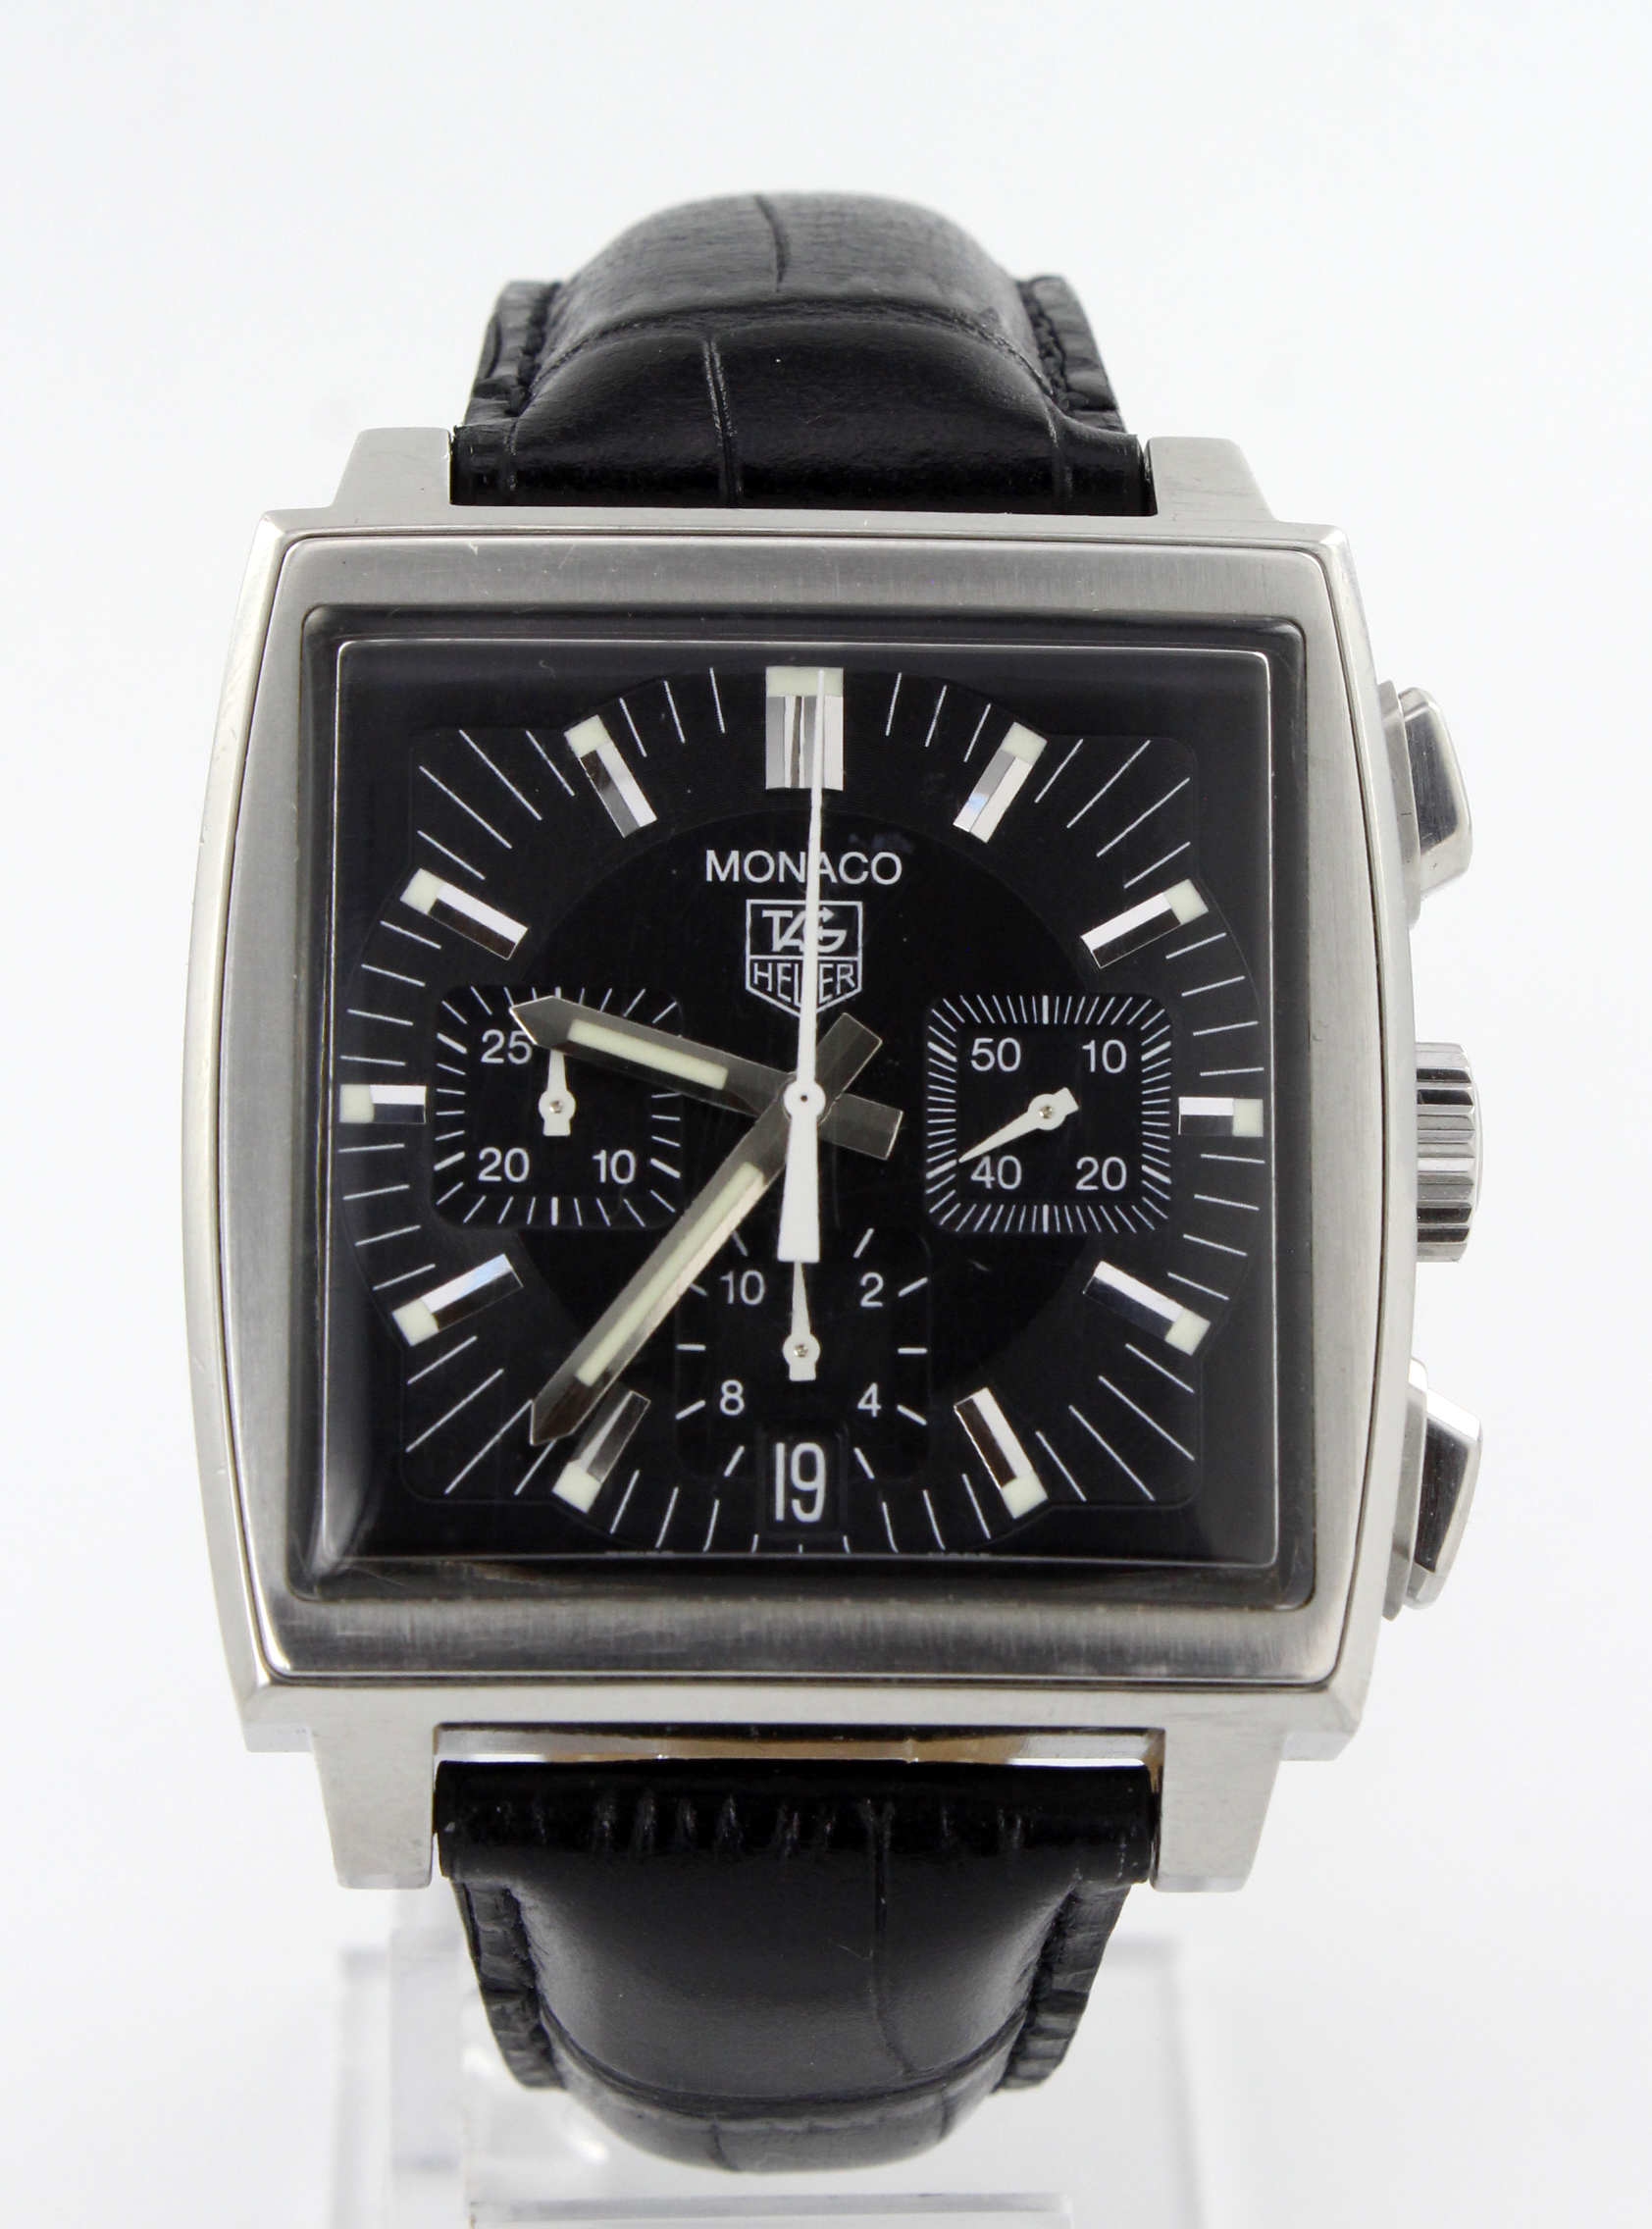 Tag Heuer Monaco stainless steel cased gents automatic chonograph wristwatch, ref. CW2111-0. The